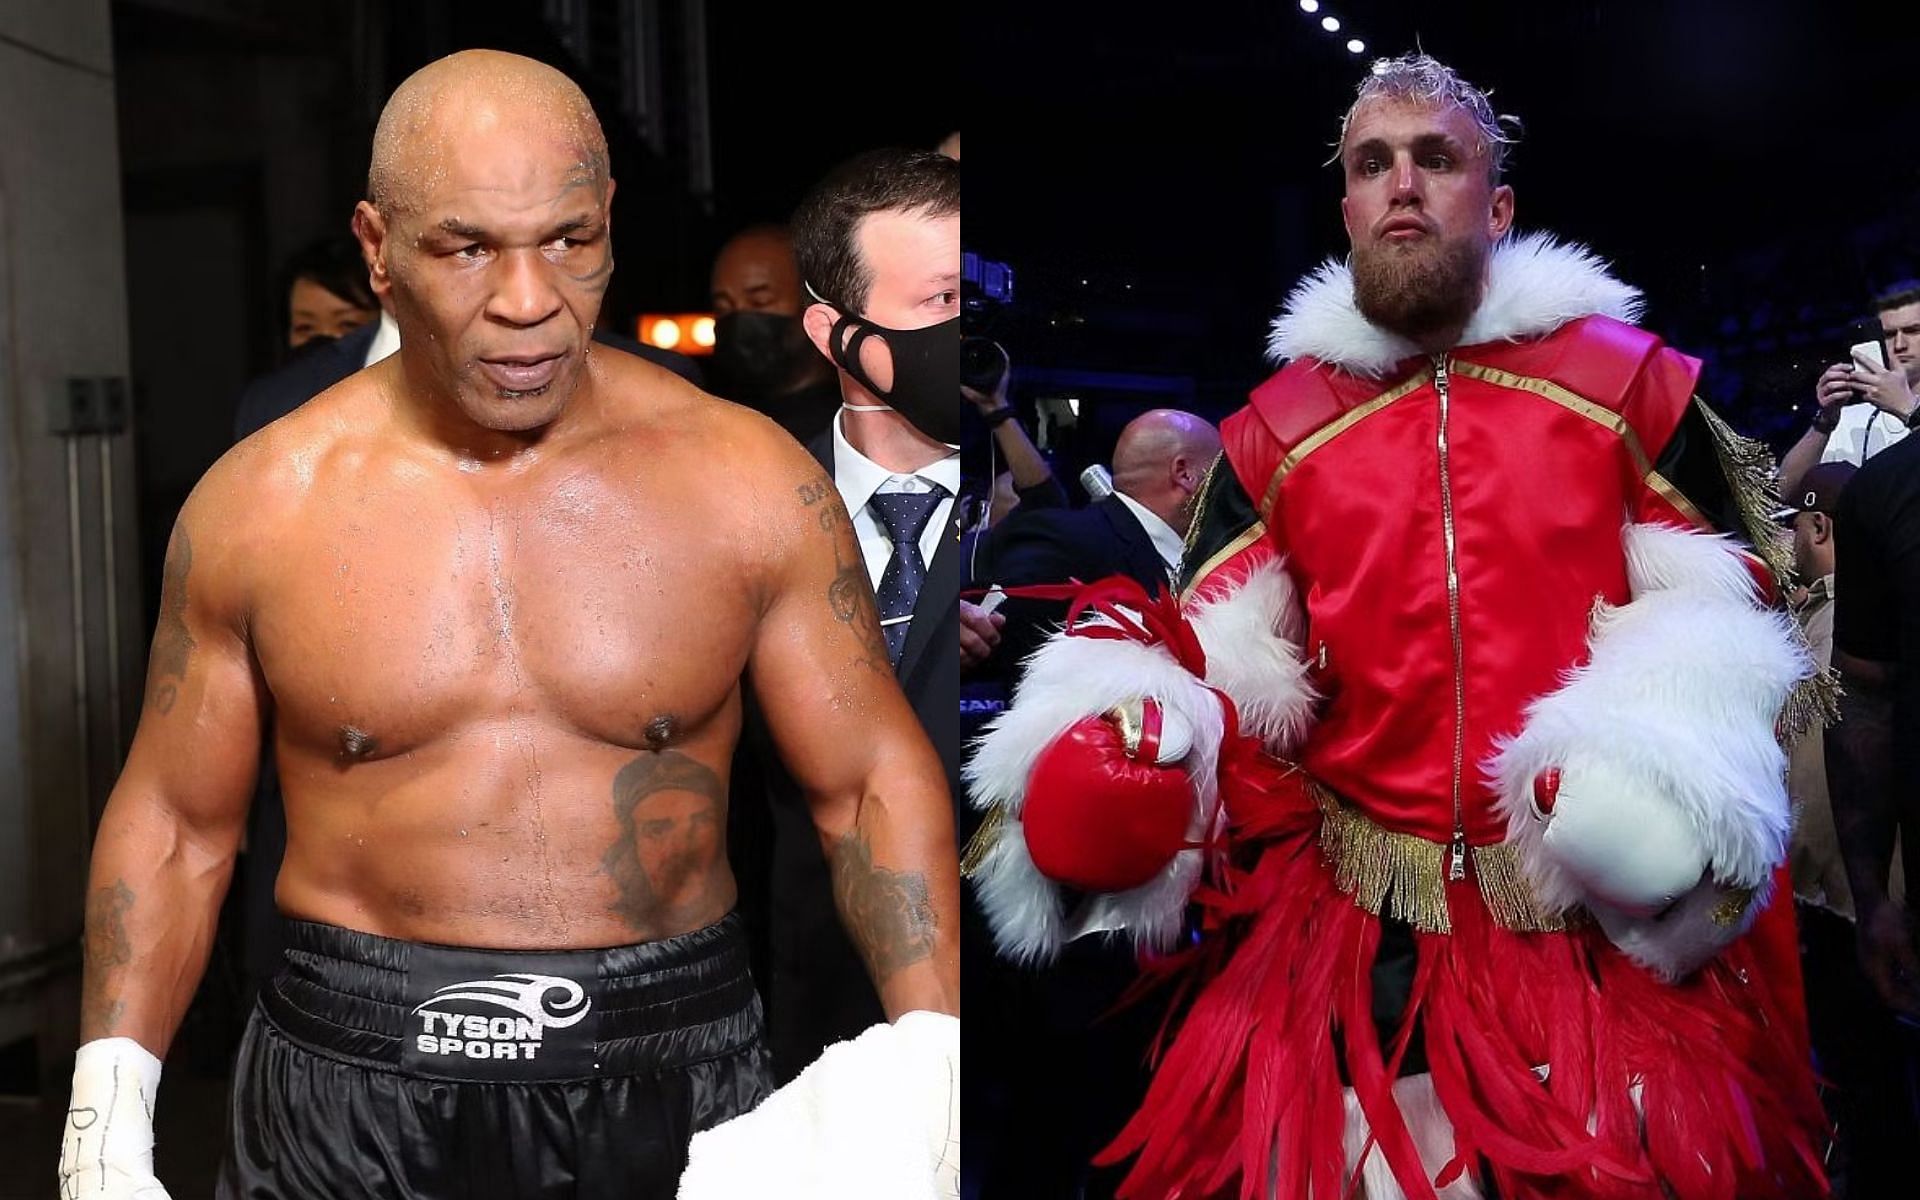 UFC legend predicts &lsquo;Iron&rsquo; Mike Tyson to prevail over Jake Paul despite massive age difference [Image courtesy: Getty Images]